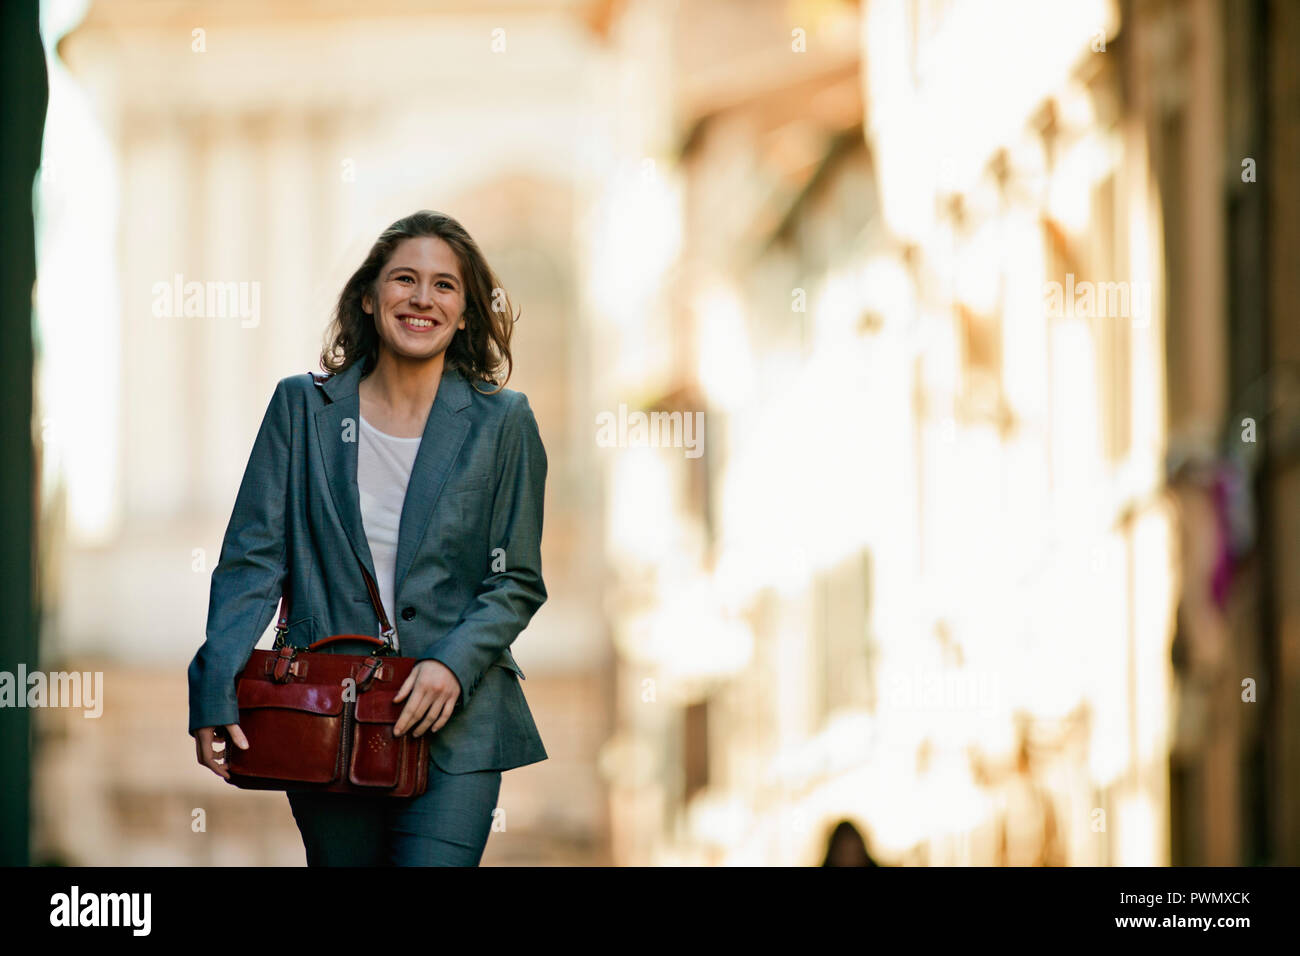 Portrait of a smiling young businesswoman walking home after work. Stock Photo